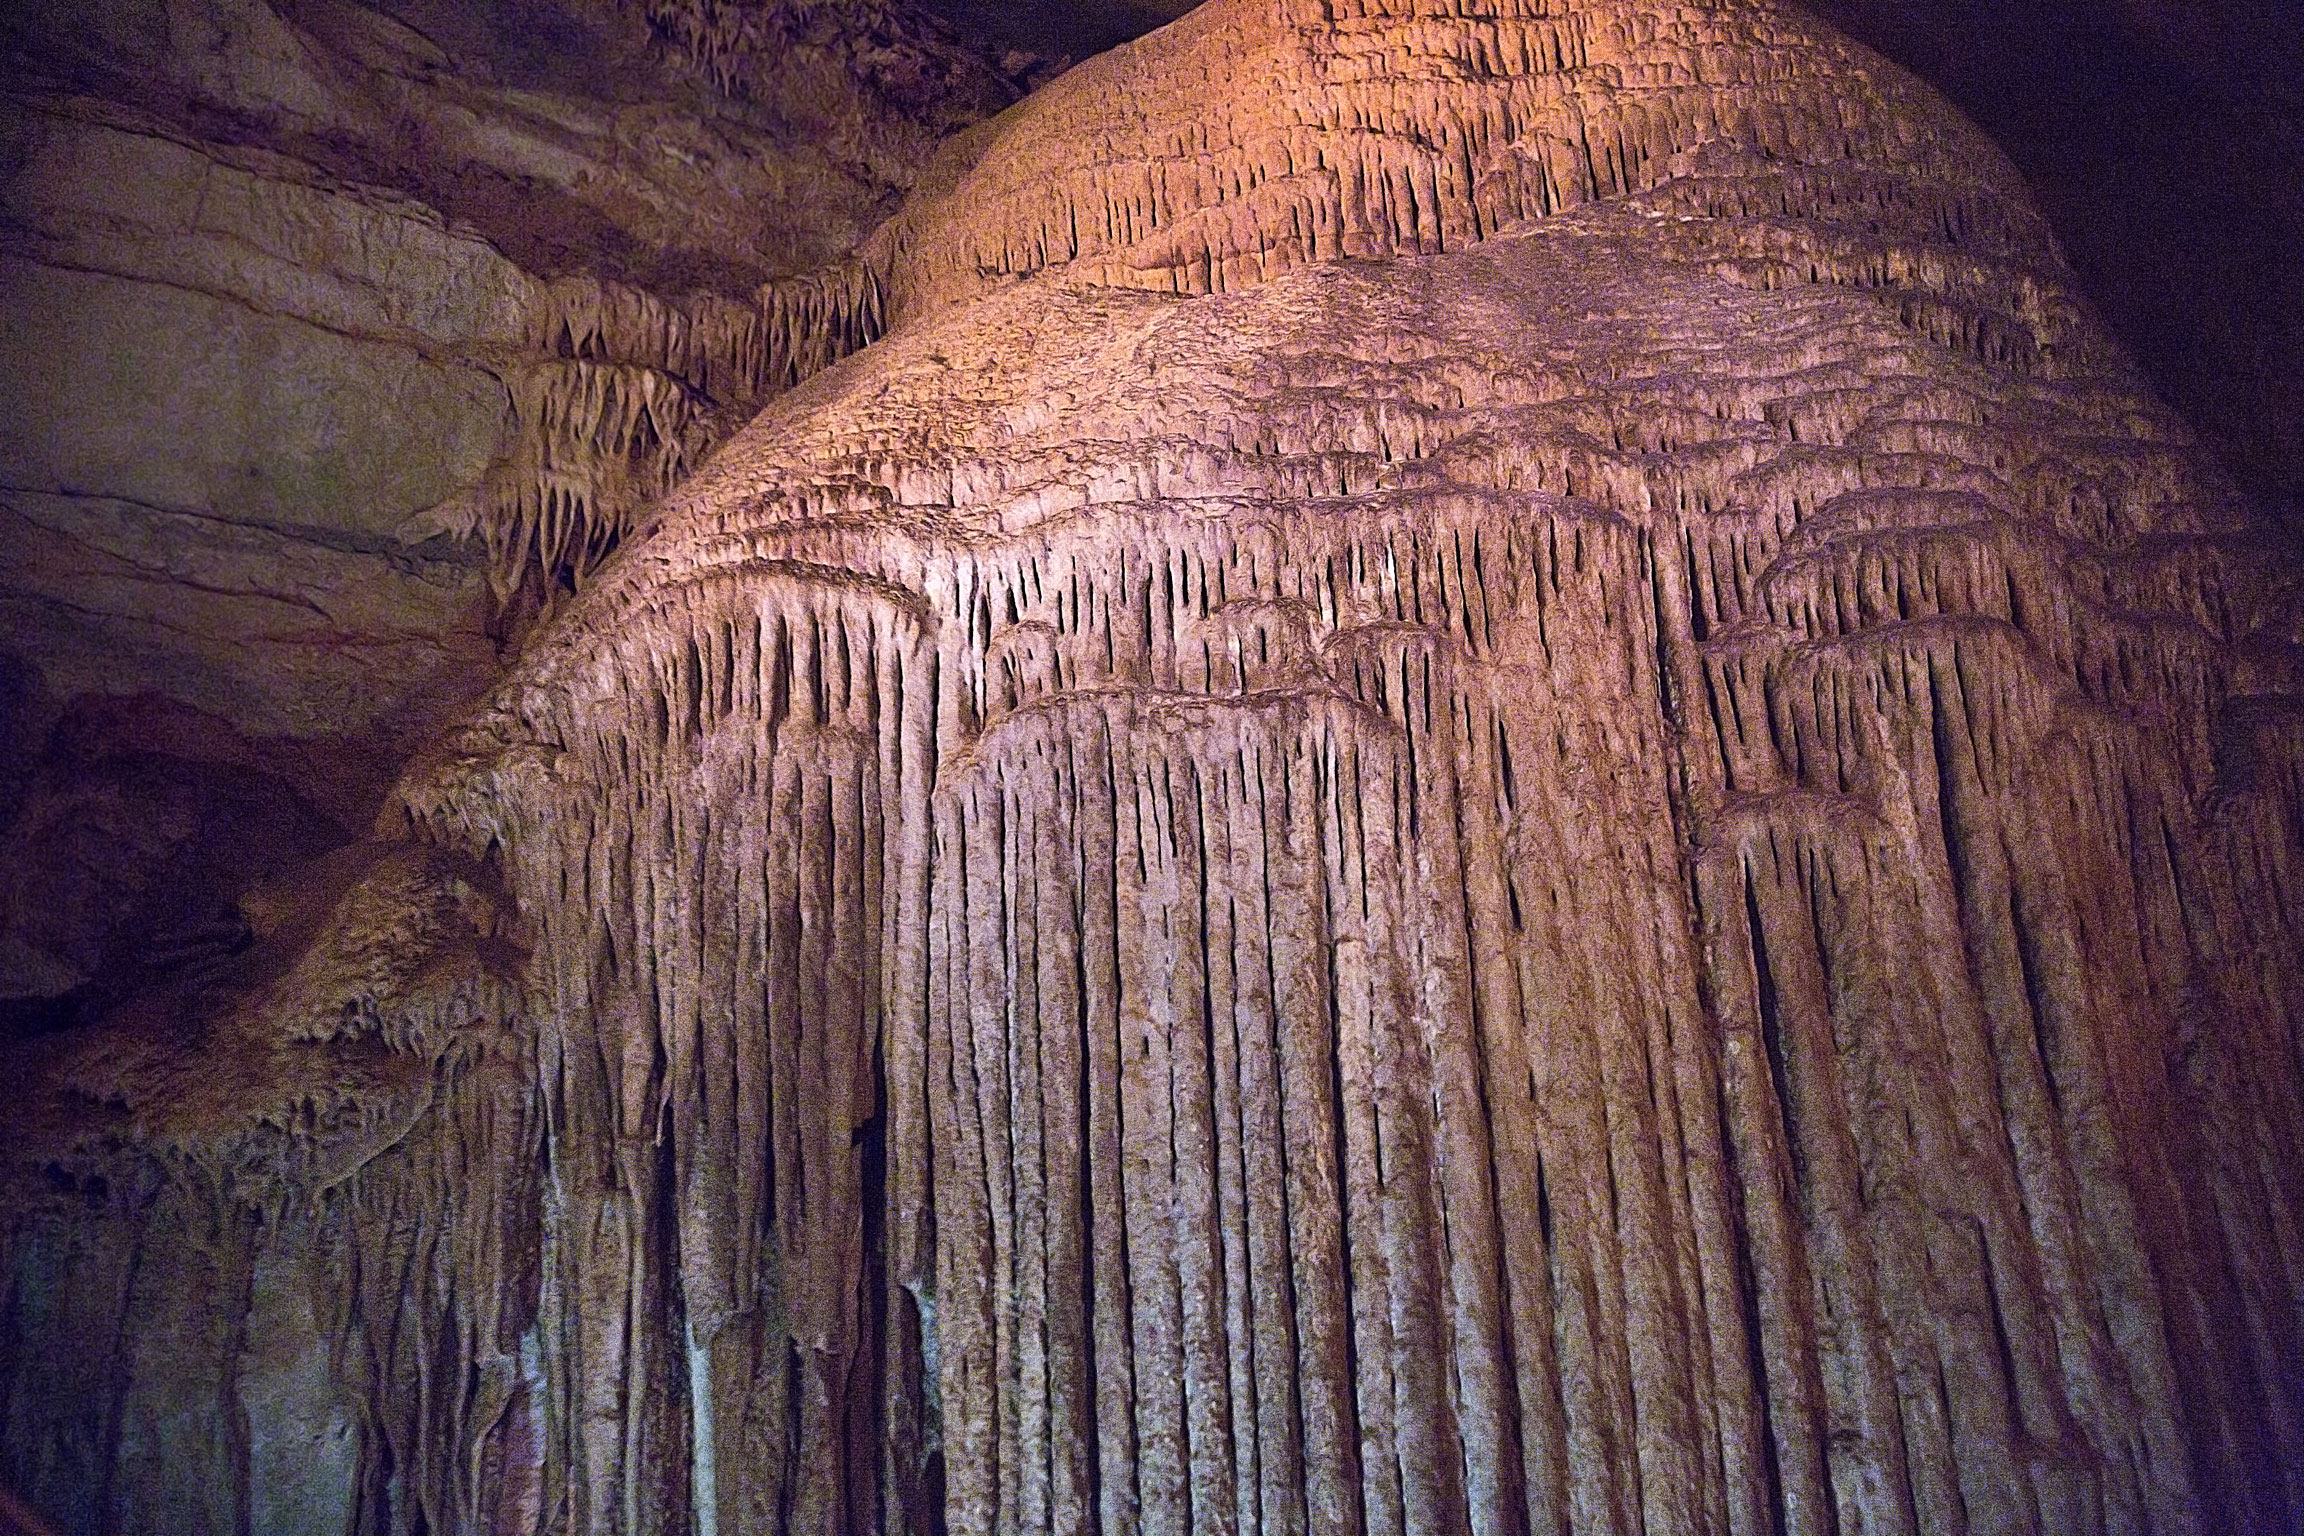 The Frozen Niagra Cave Formation